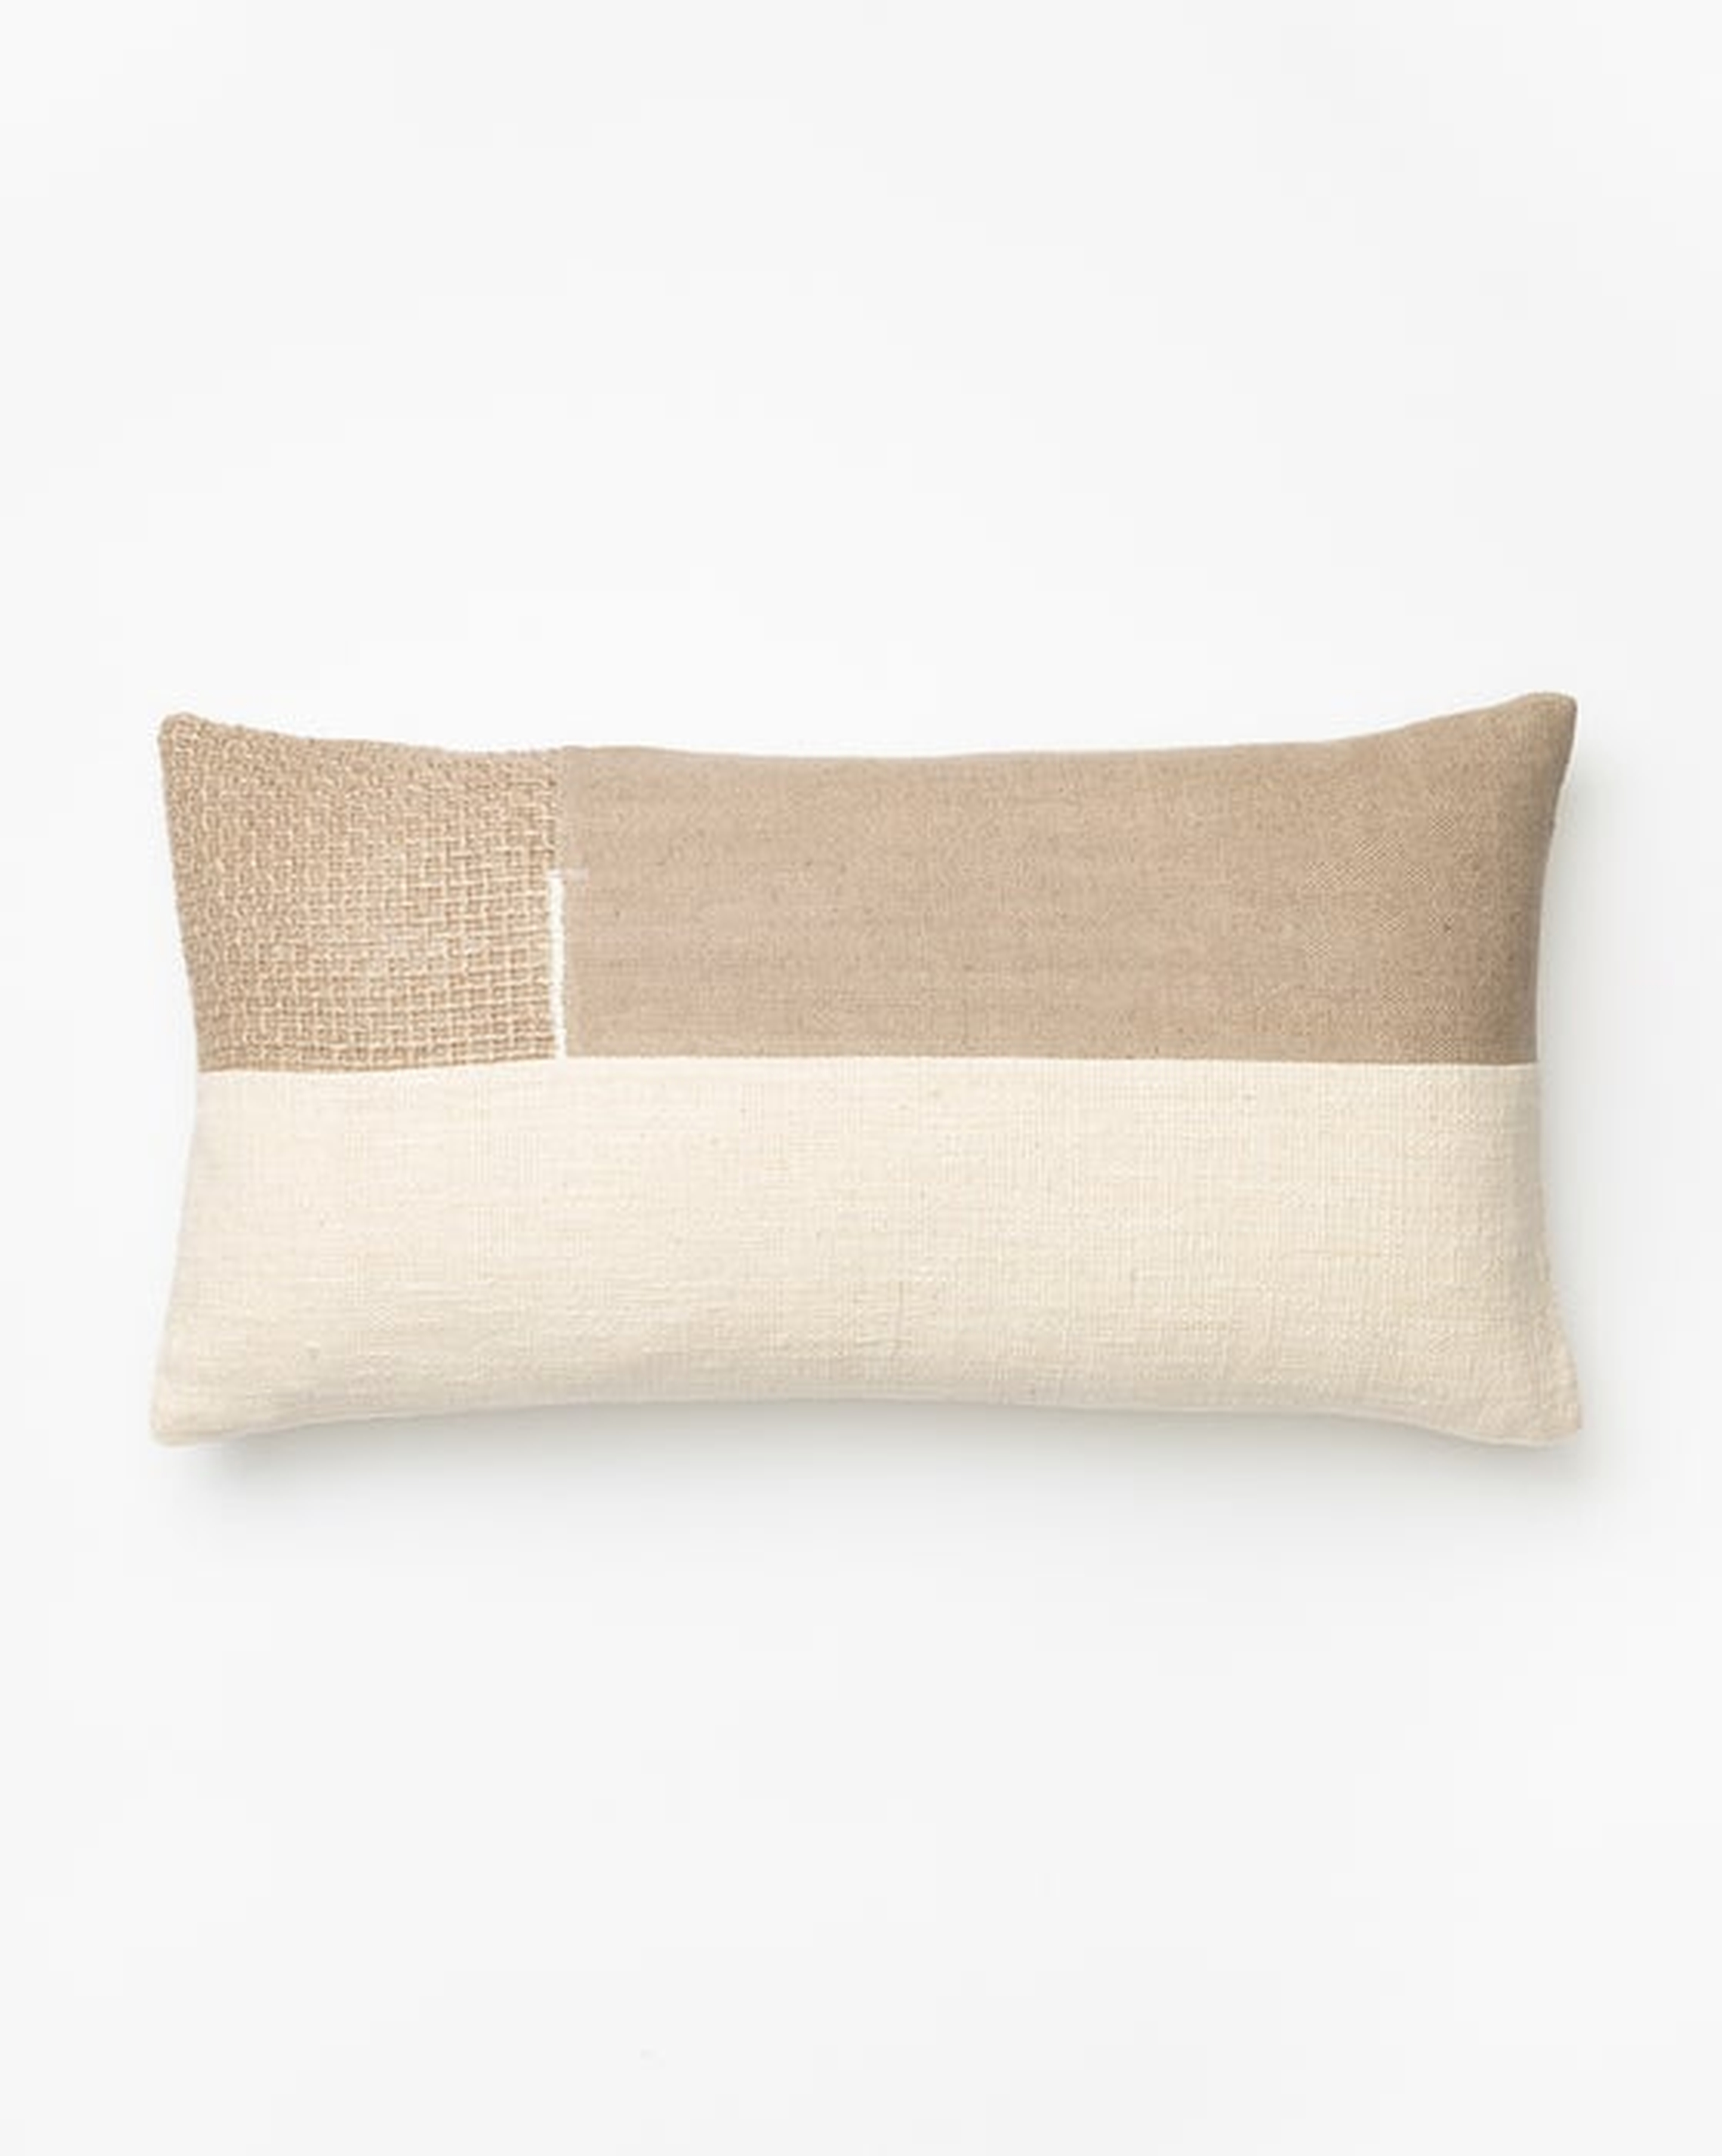 Persephone Pillow - McGee & Co.